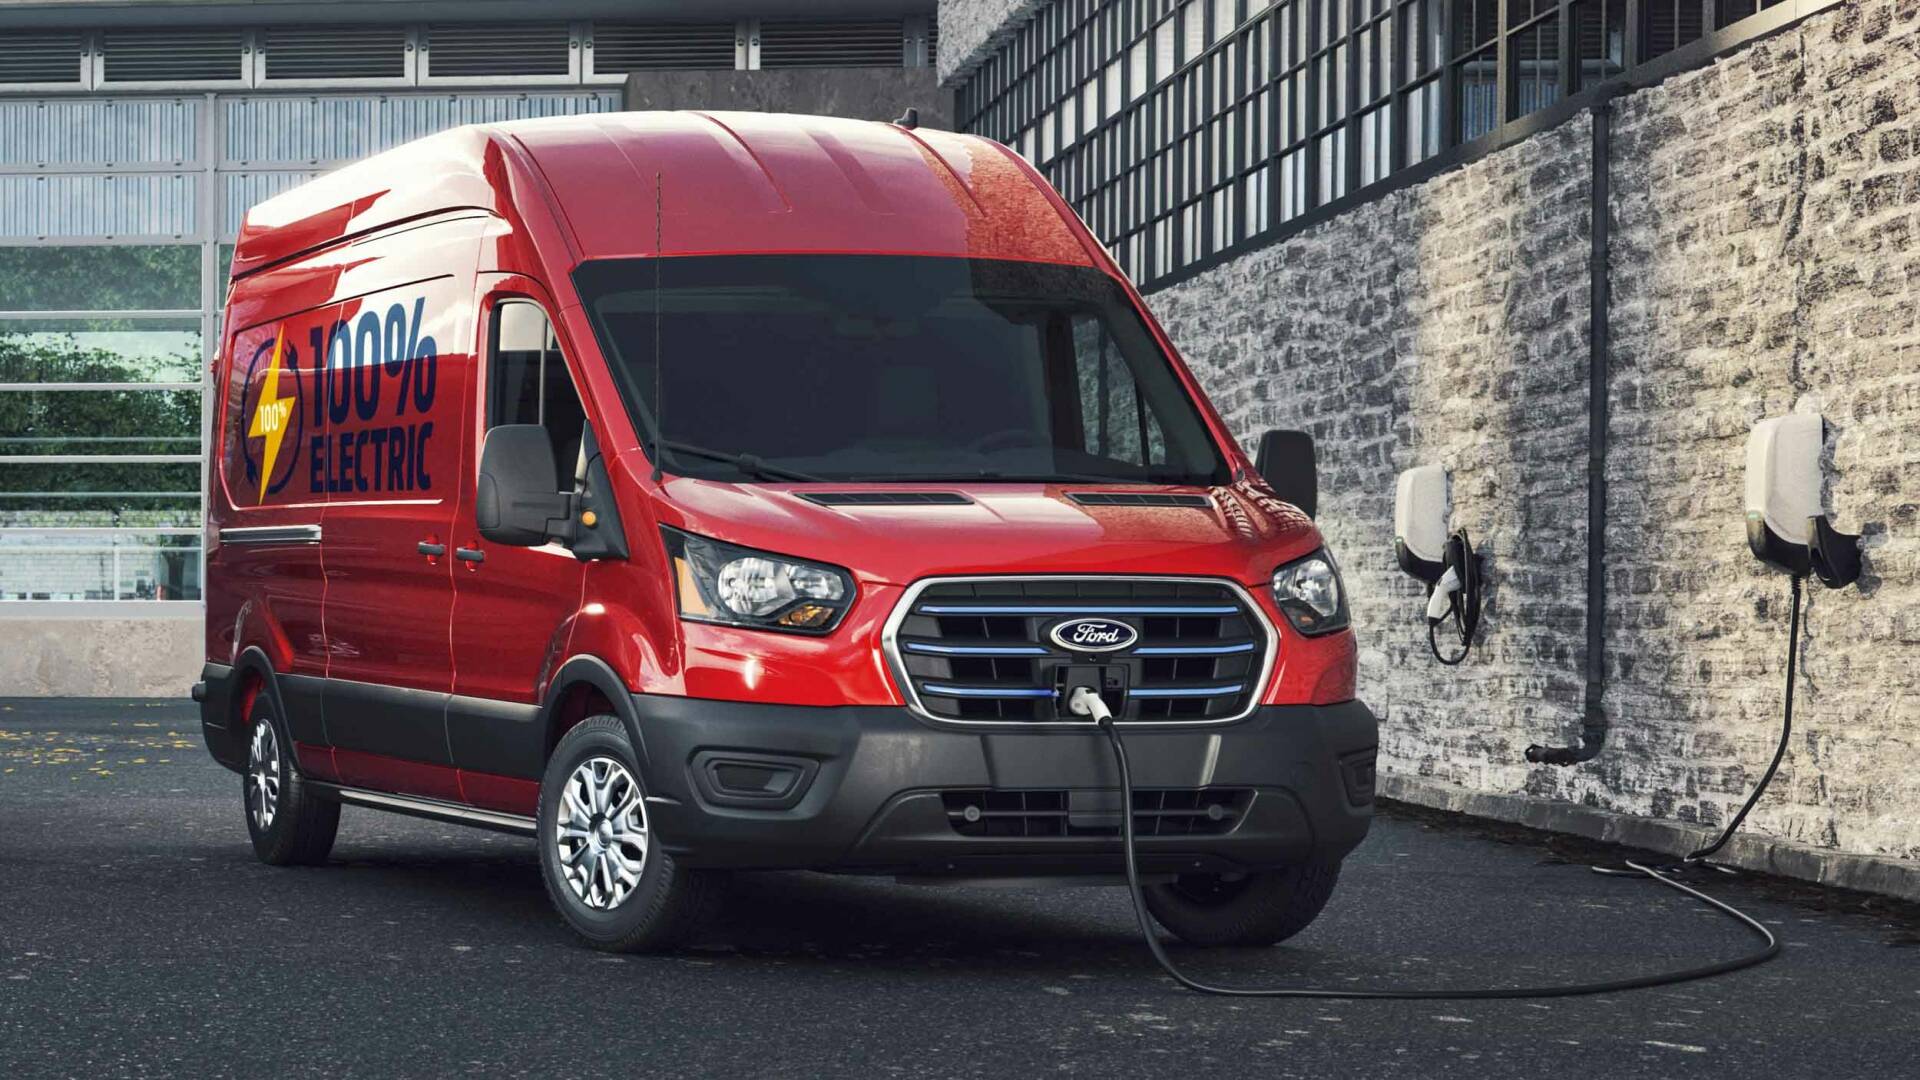 A 2022 Ford E Transit (Credits: Ford)